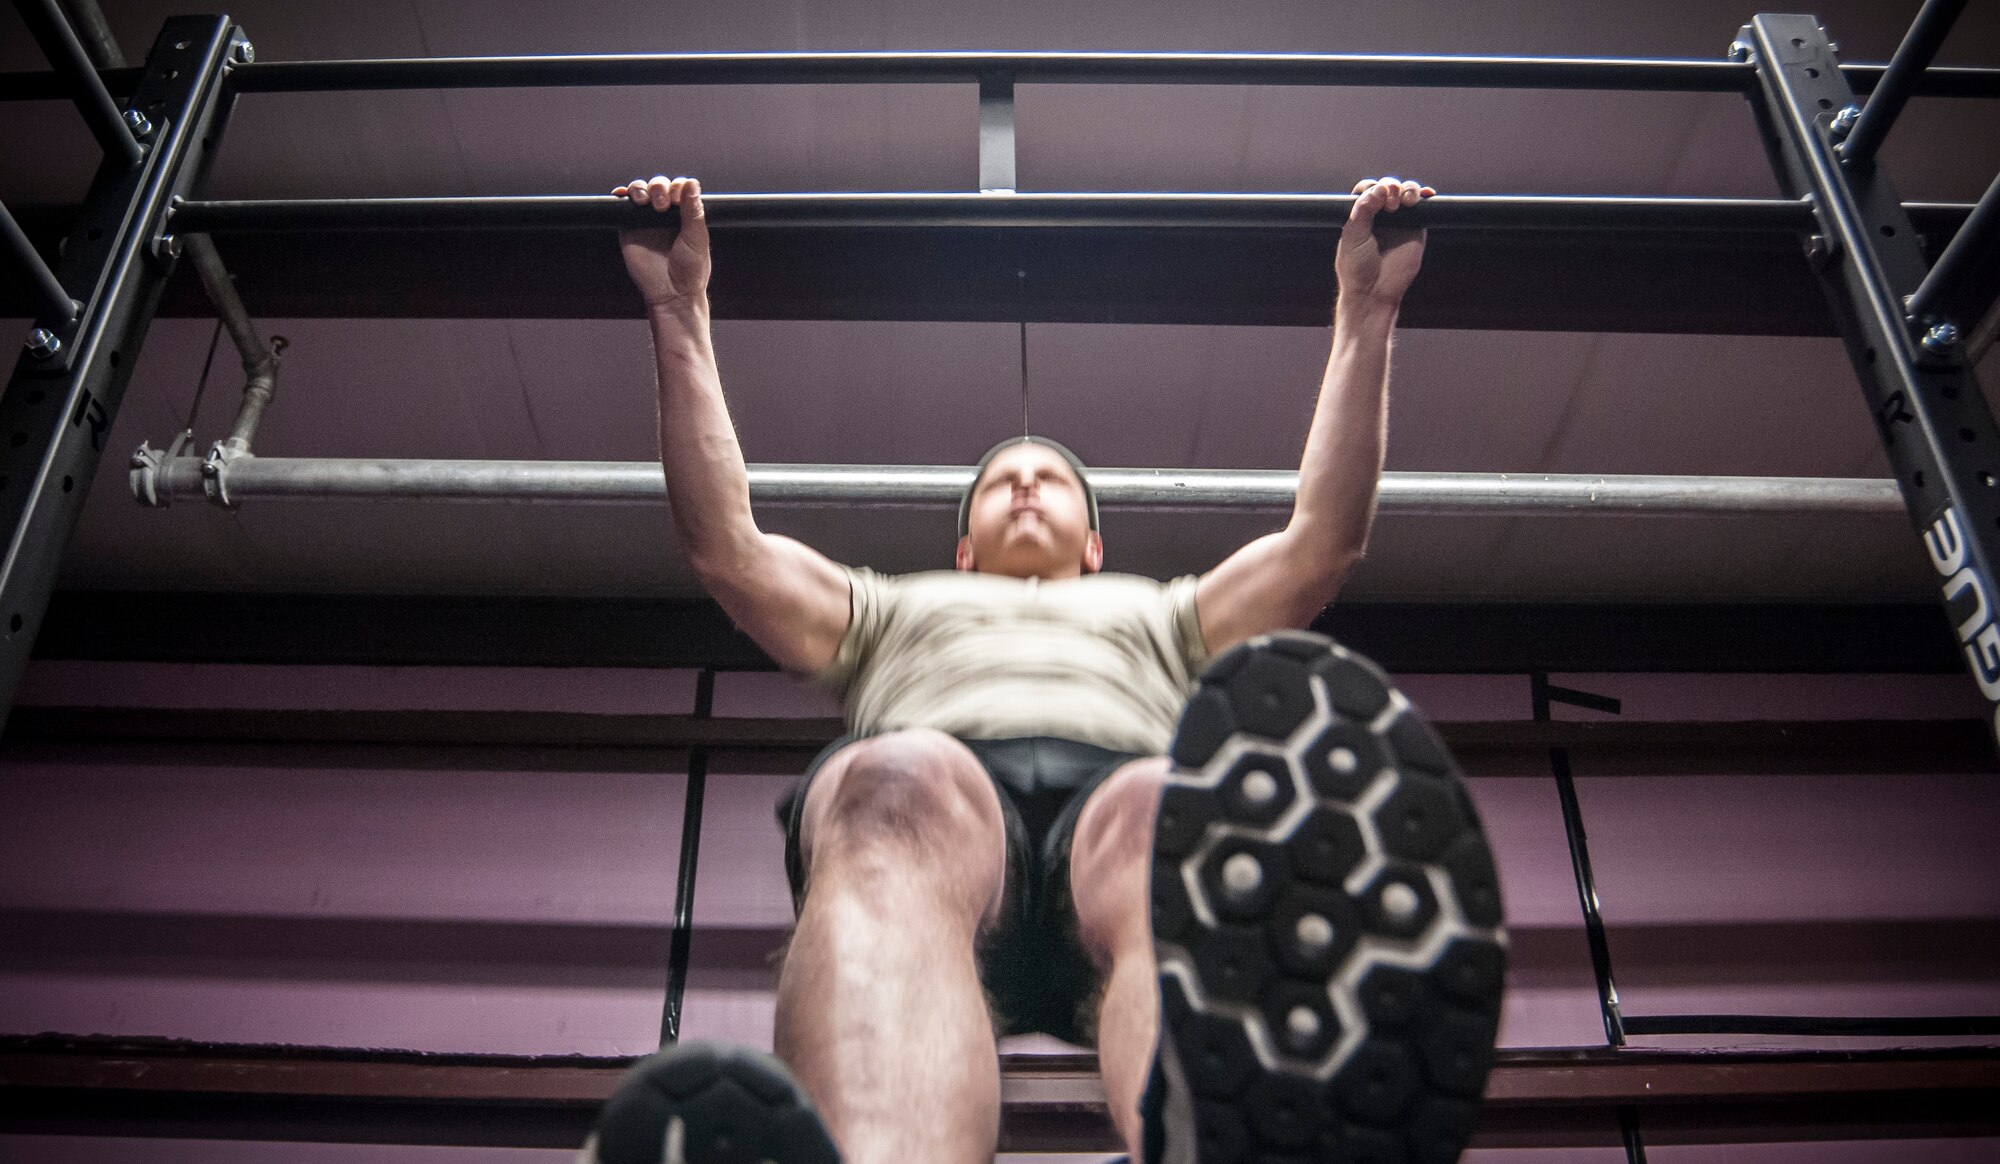 Staff Sgt. Nicholas Menz performs chest to bar pull ups in a team crossfit workout. Both Airman from the 169th Air Support Operations Squadron, Peoria, IL, train together on a regular basis to maintain a high fitness requirement there career field requires on January 10, 2015. As Joint Terminal Attack Controllers the demanding job needs each airman to perform at peak performance alongside their Army counterparts out in the field. Besides the fitness benefits the members are getting teamwork, camaraderie and morale building are big advantages they are creating. They are building physical strength but more importantly the strength of teamwork to take to the battlefield. (U.S. Air National Guard photo by Master Sgt. Scott Thompson/released)